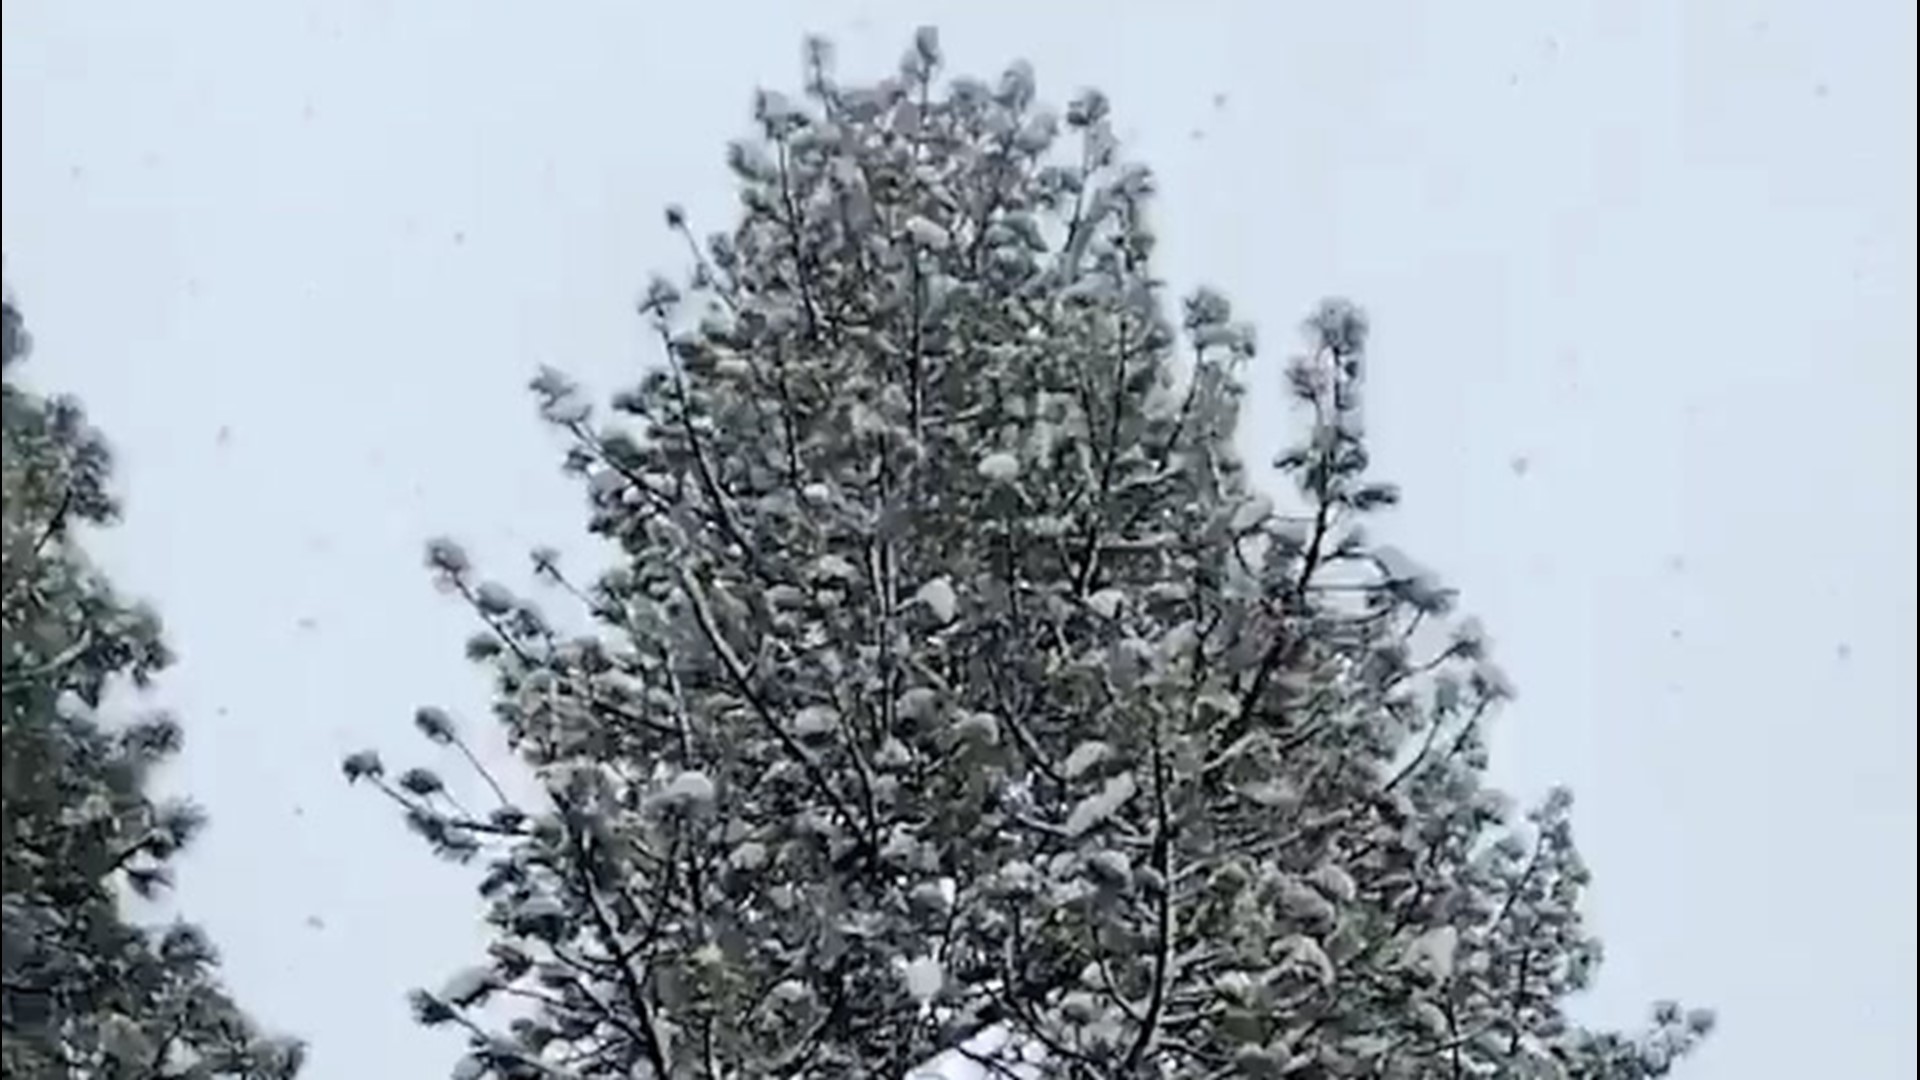 These tree branches were covered in snow after a spring snowstorm hit Lake Tahoe, California, on April 5.